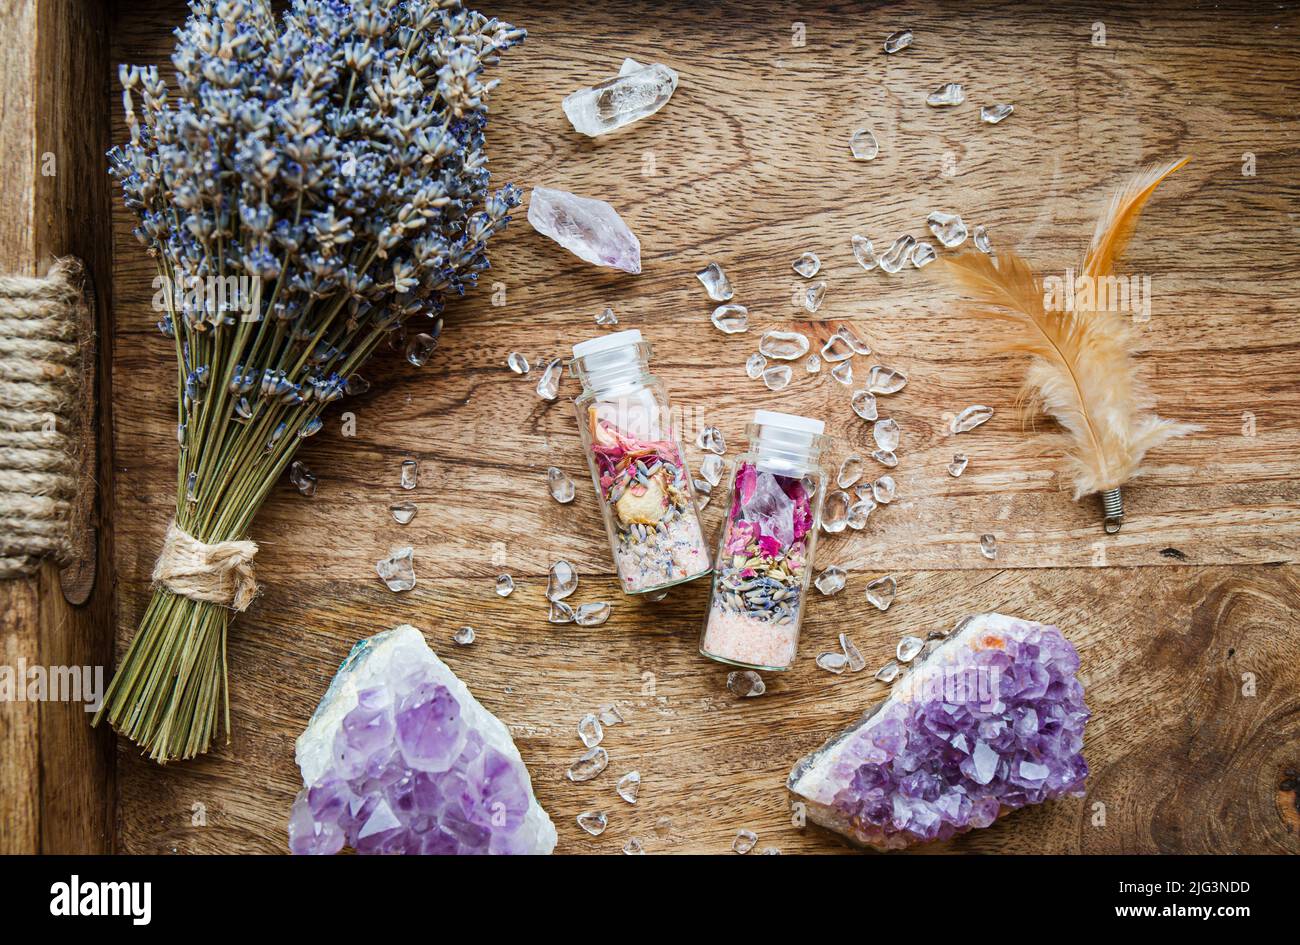 Homemade spell jar bottles with good intentions for home protection and inner balance. Filled with Himalayan rock salt, dried herbs flowers. Stock Photo